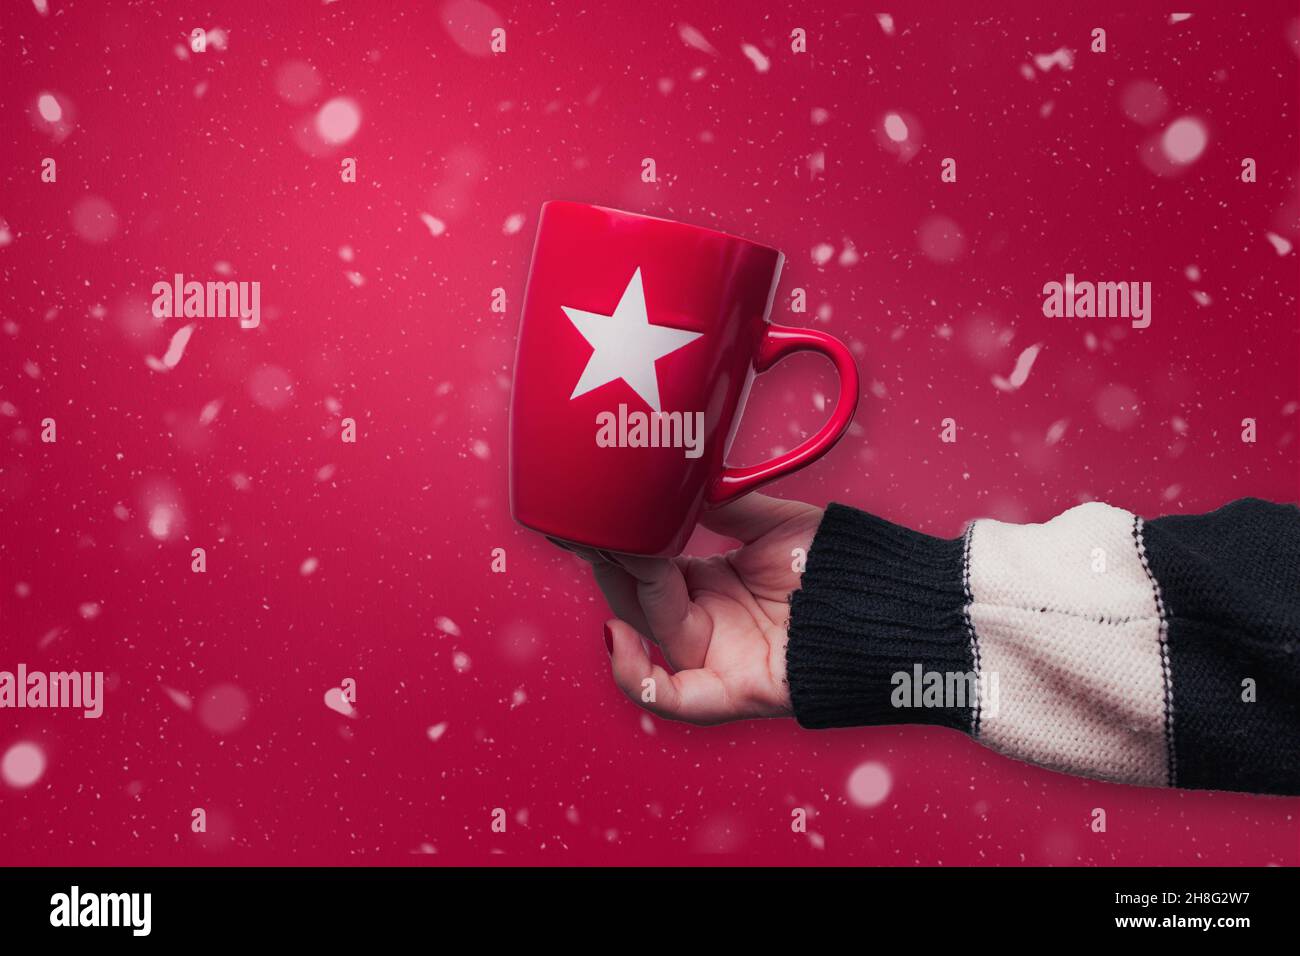 Red Christmas mug with red snowy background. Christmas concept design. Stock Photo